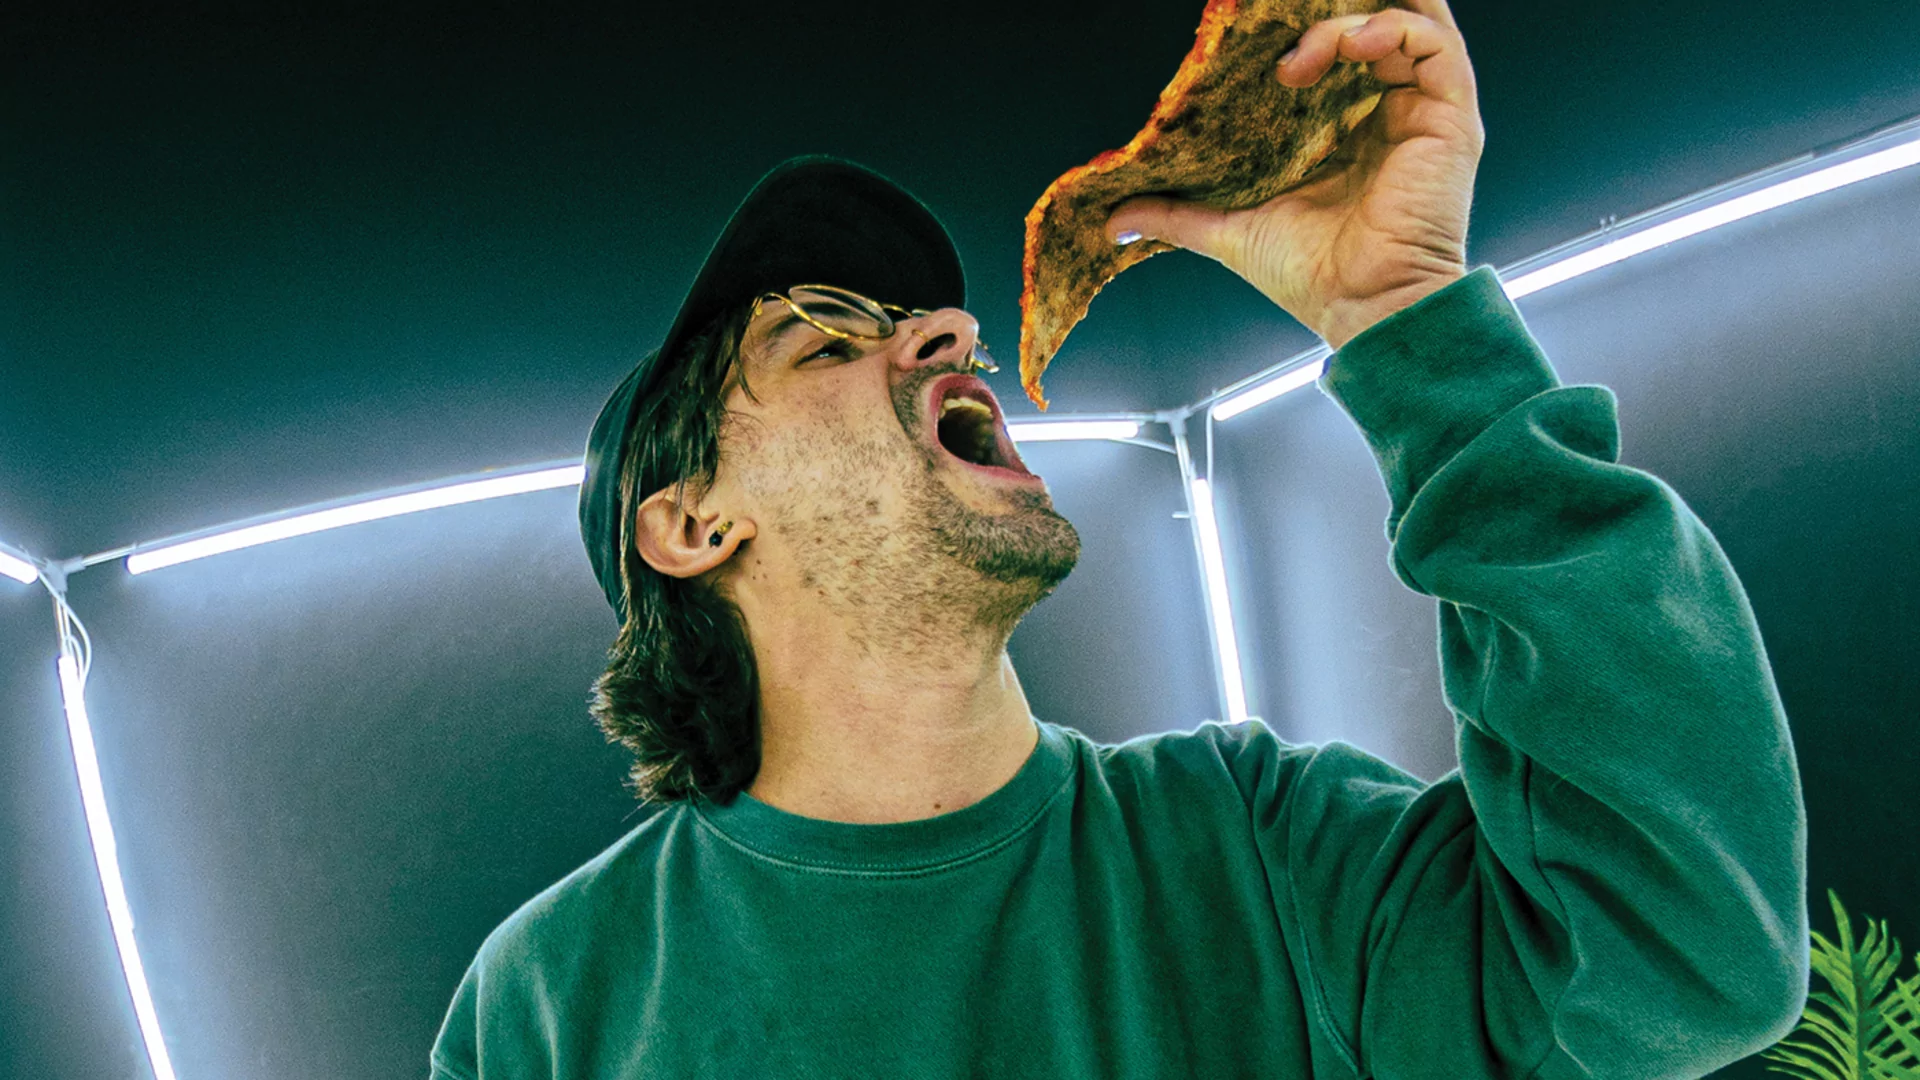 Devon James in a green sweater, cap and glasses, leaning back while eating a slice of pizza in front of white strip lights